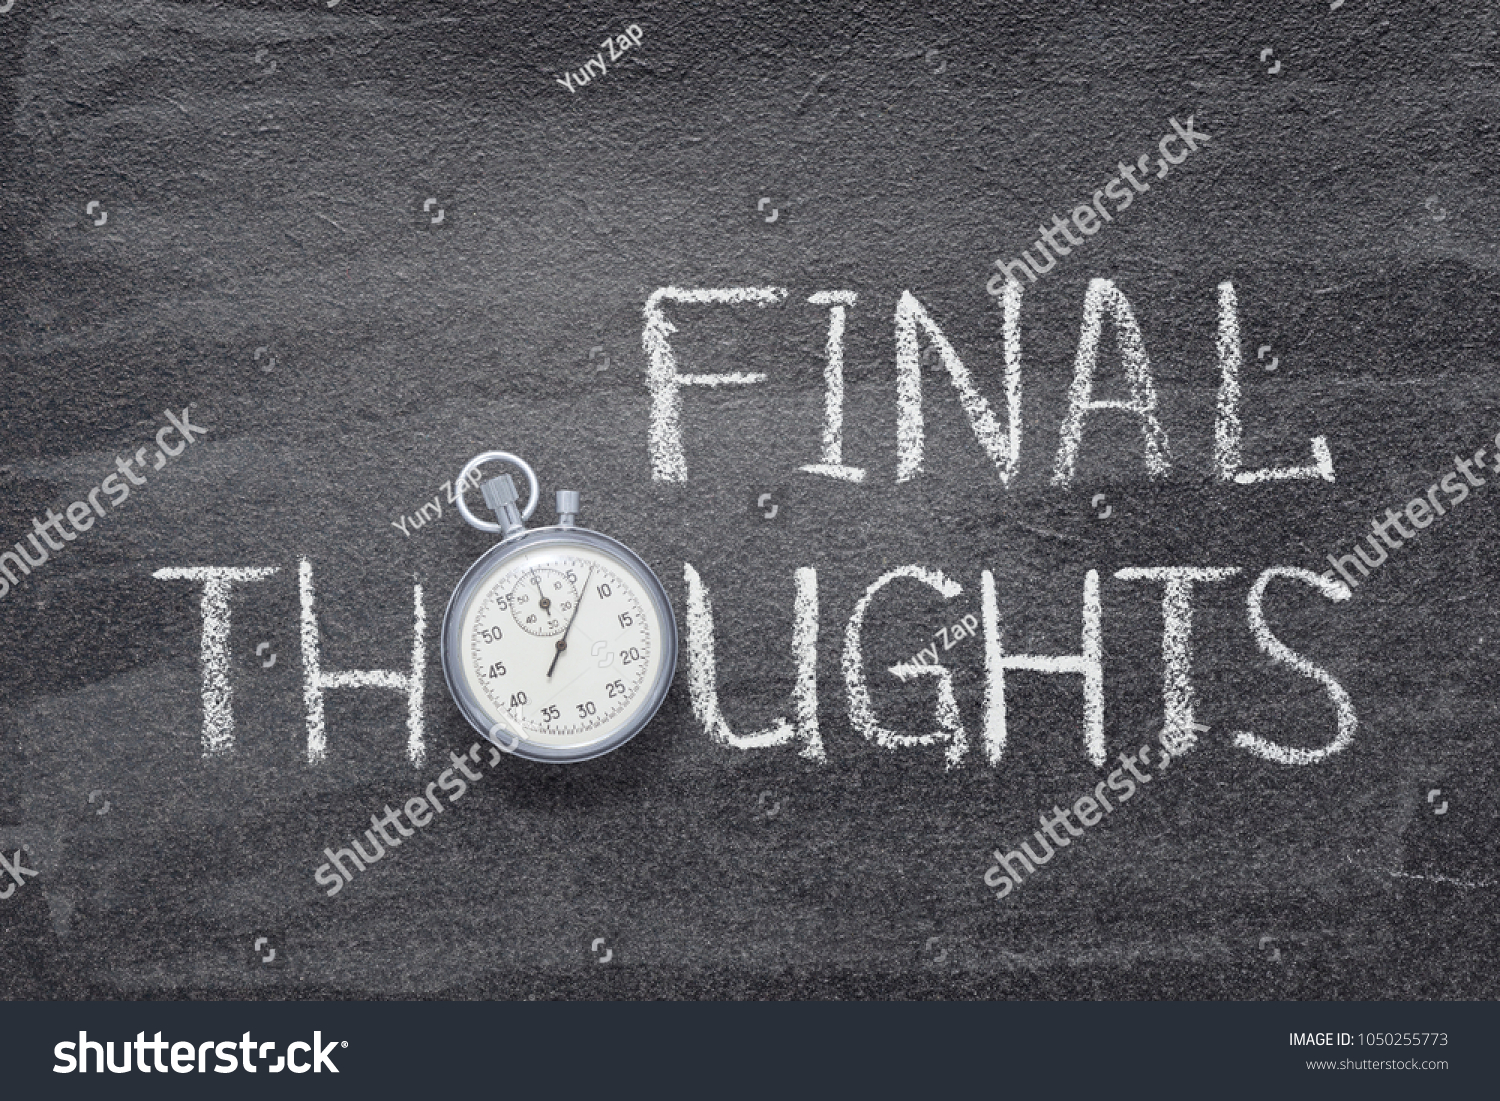 final thoughts phrase handwritten on chalkboard with vintage precise stopwatch used instead of O #1050255773